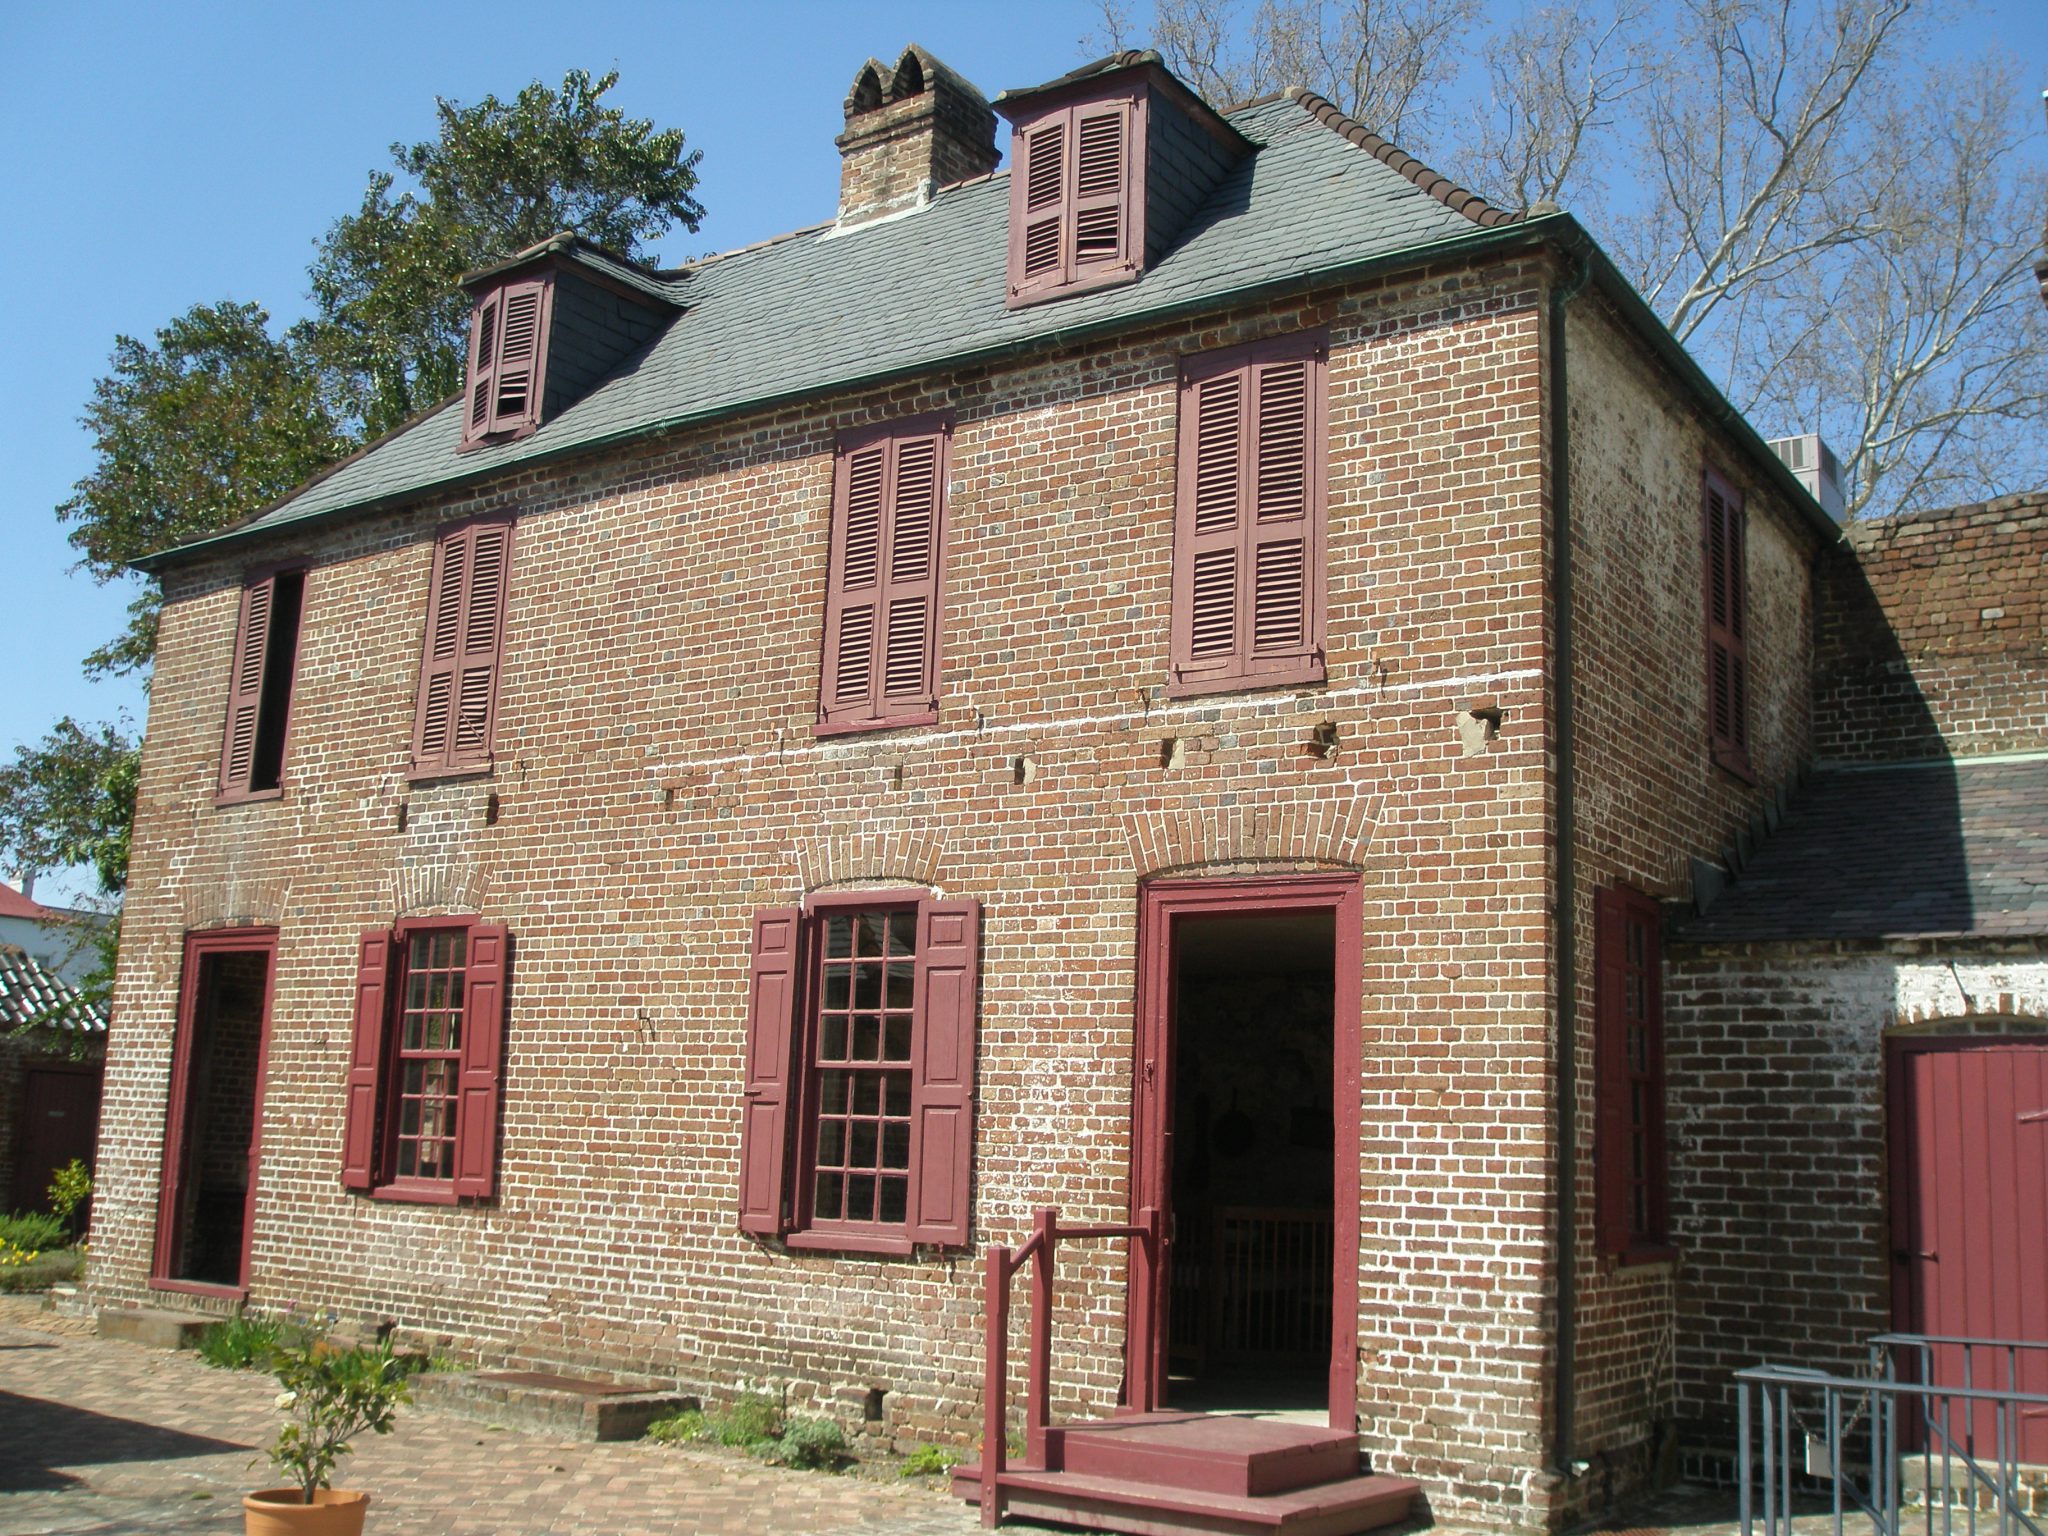 Separate from the main house: the Kitchen & Laundry Building. As a method of fire-prevention, most Charleston homes were built with outbuildings to contain necessarily inflammatory activities such as cooking and heating water.